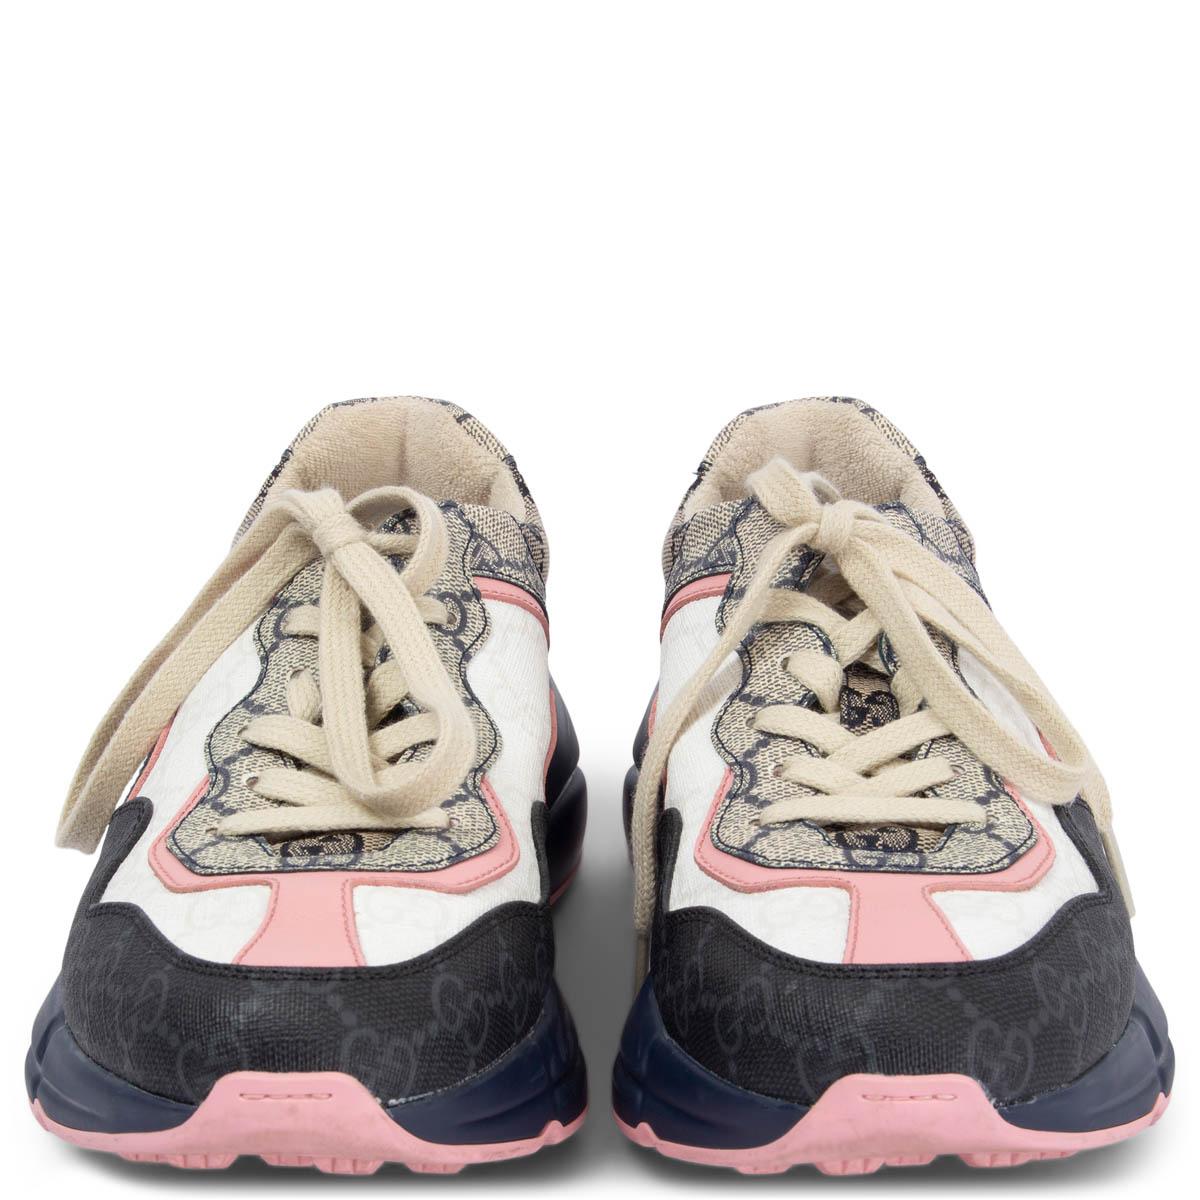 100% authentic Gucci 2022 Rhyton sneakers in beige, rose pink, white and navy blue GG Supreme canvas with navy blue and rose pink rubber sole. Have been worn twice and are in excellent condition. 

Measurements
Imprinted Size	36.5
Shoe